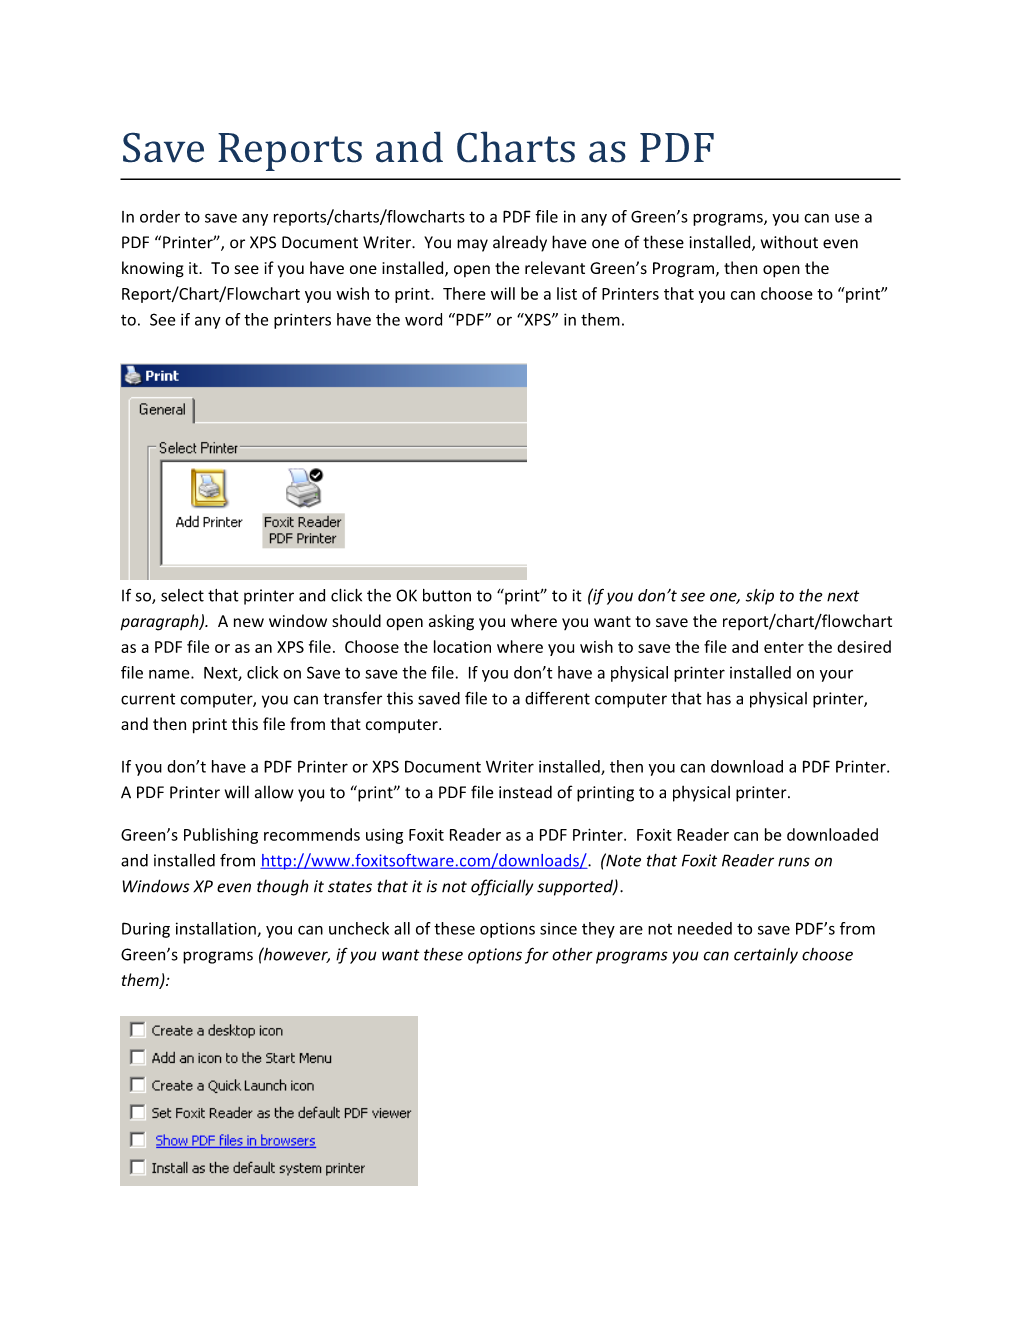 Save Reports and Charts As PDF